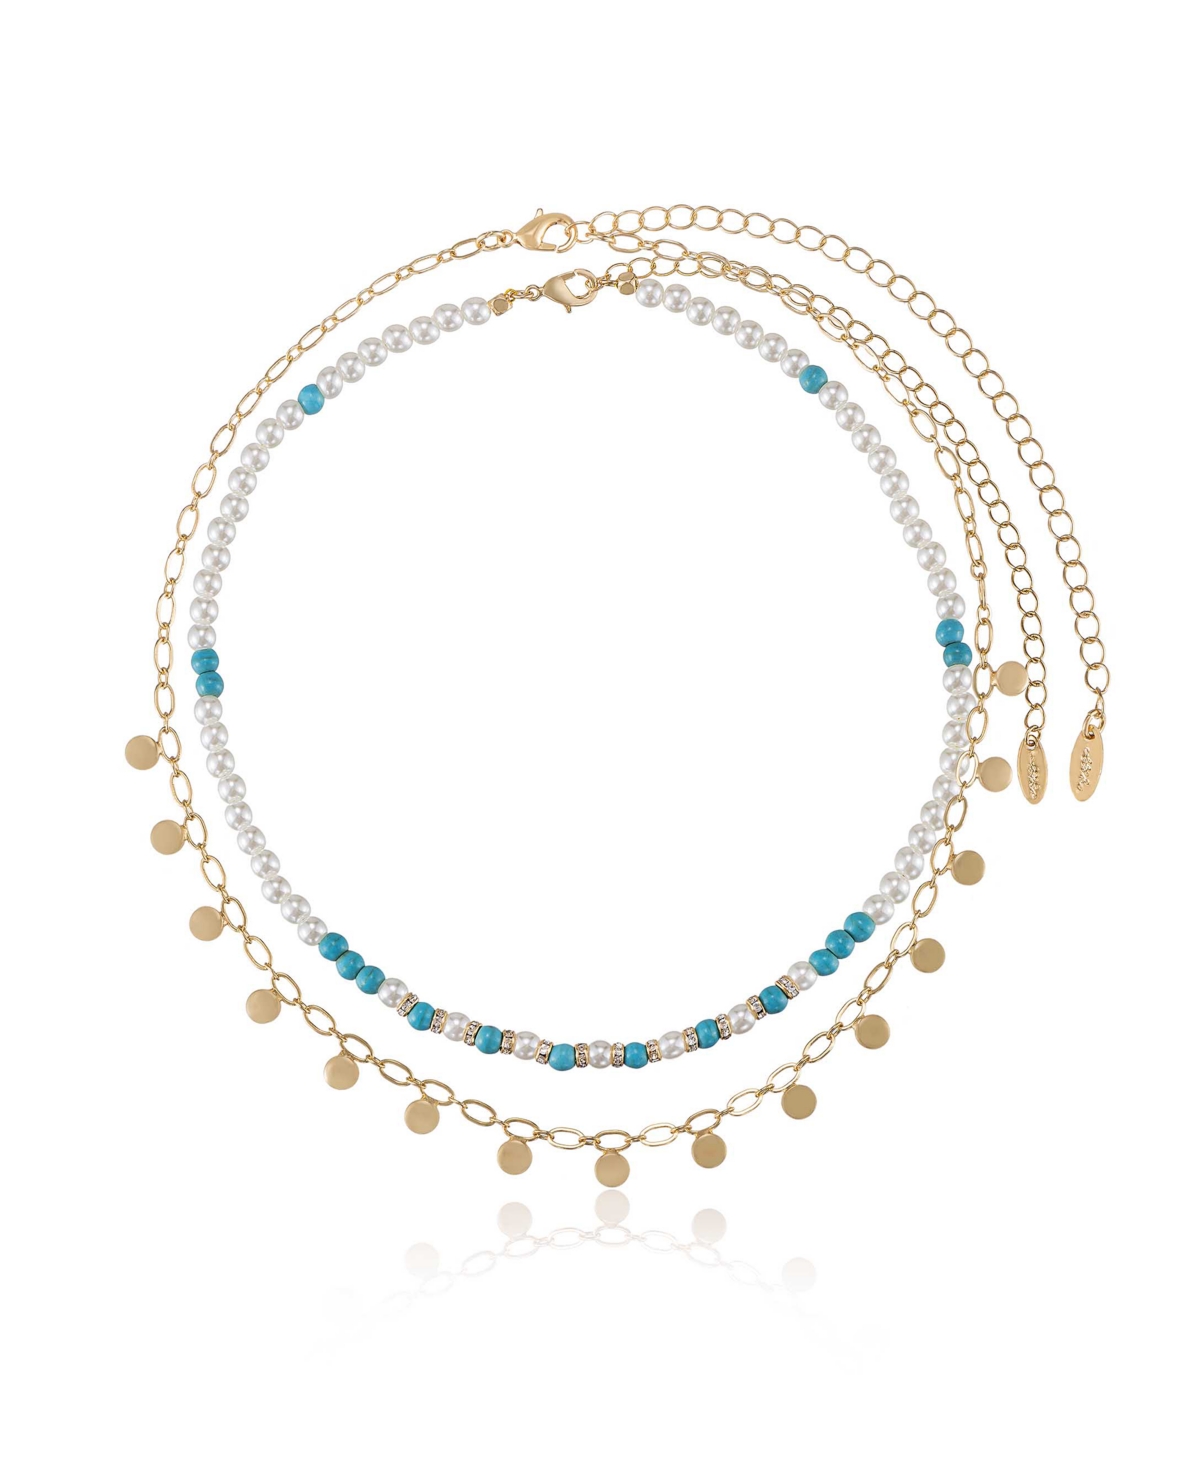 Morocco Turquoise Beaded 18k Gold Plated Necklace Set - Turquoise